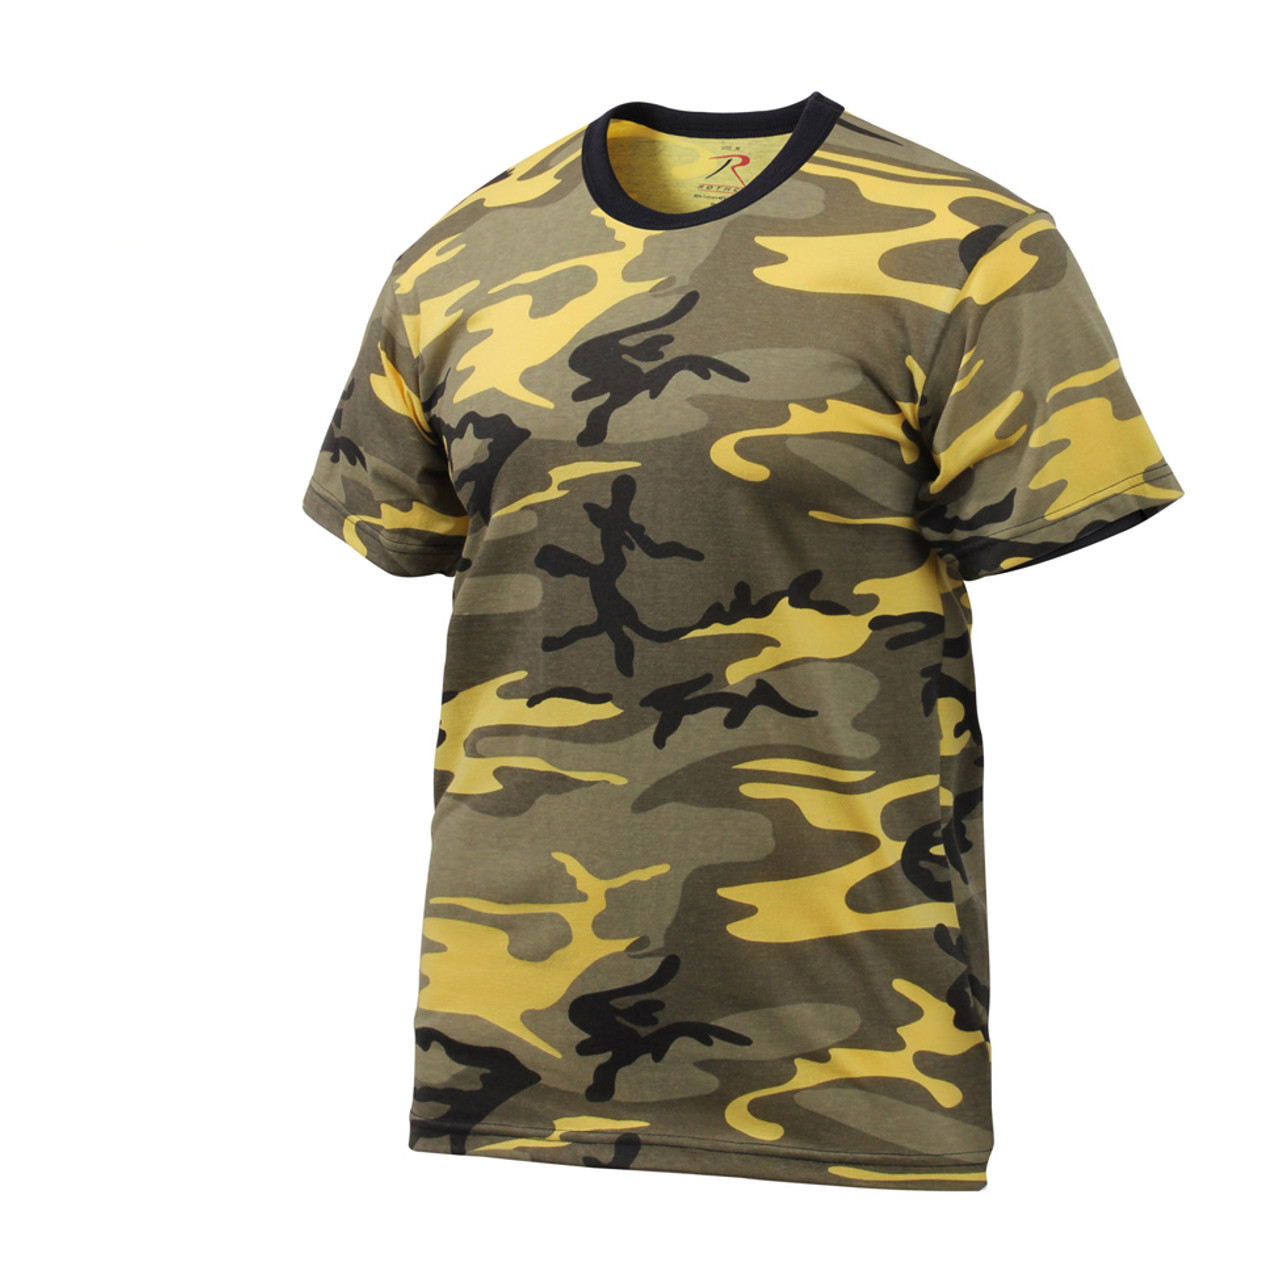 Shop Stinger Yellow Camo T Shirts - Fatigues Army Navy Gear